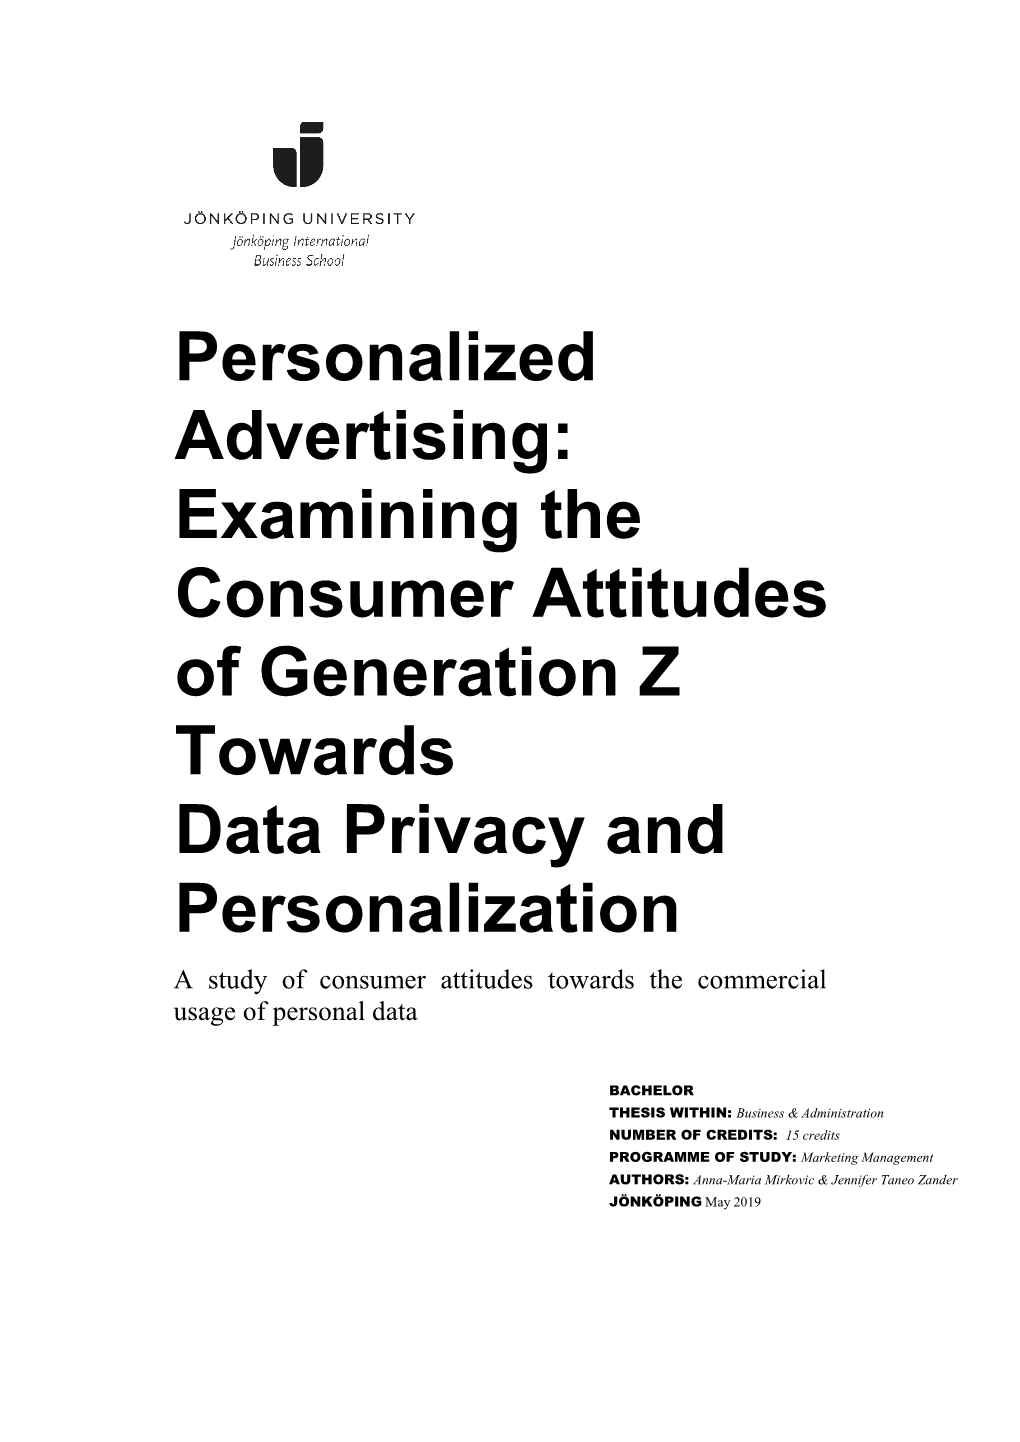 Examining the Consumer Attitudes of Generation Z Towards Data Privacy and Personalization